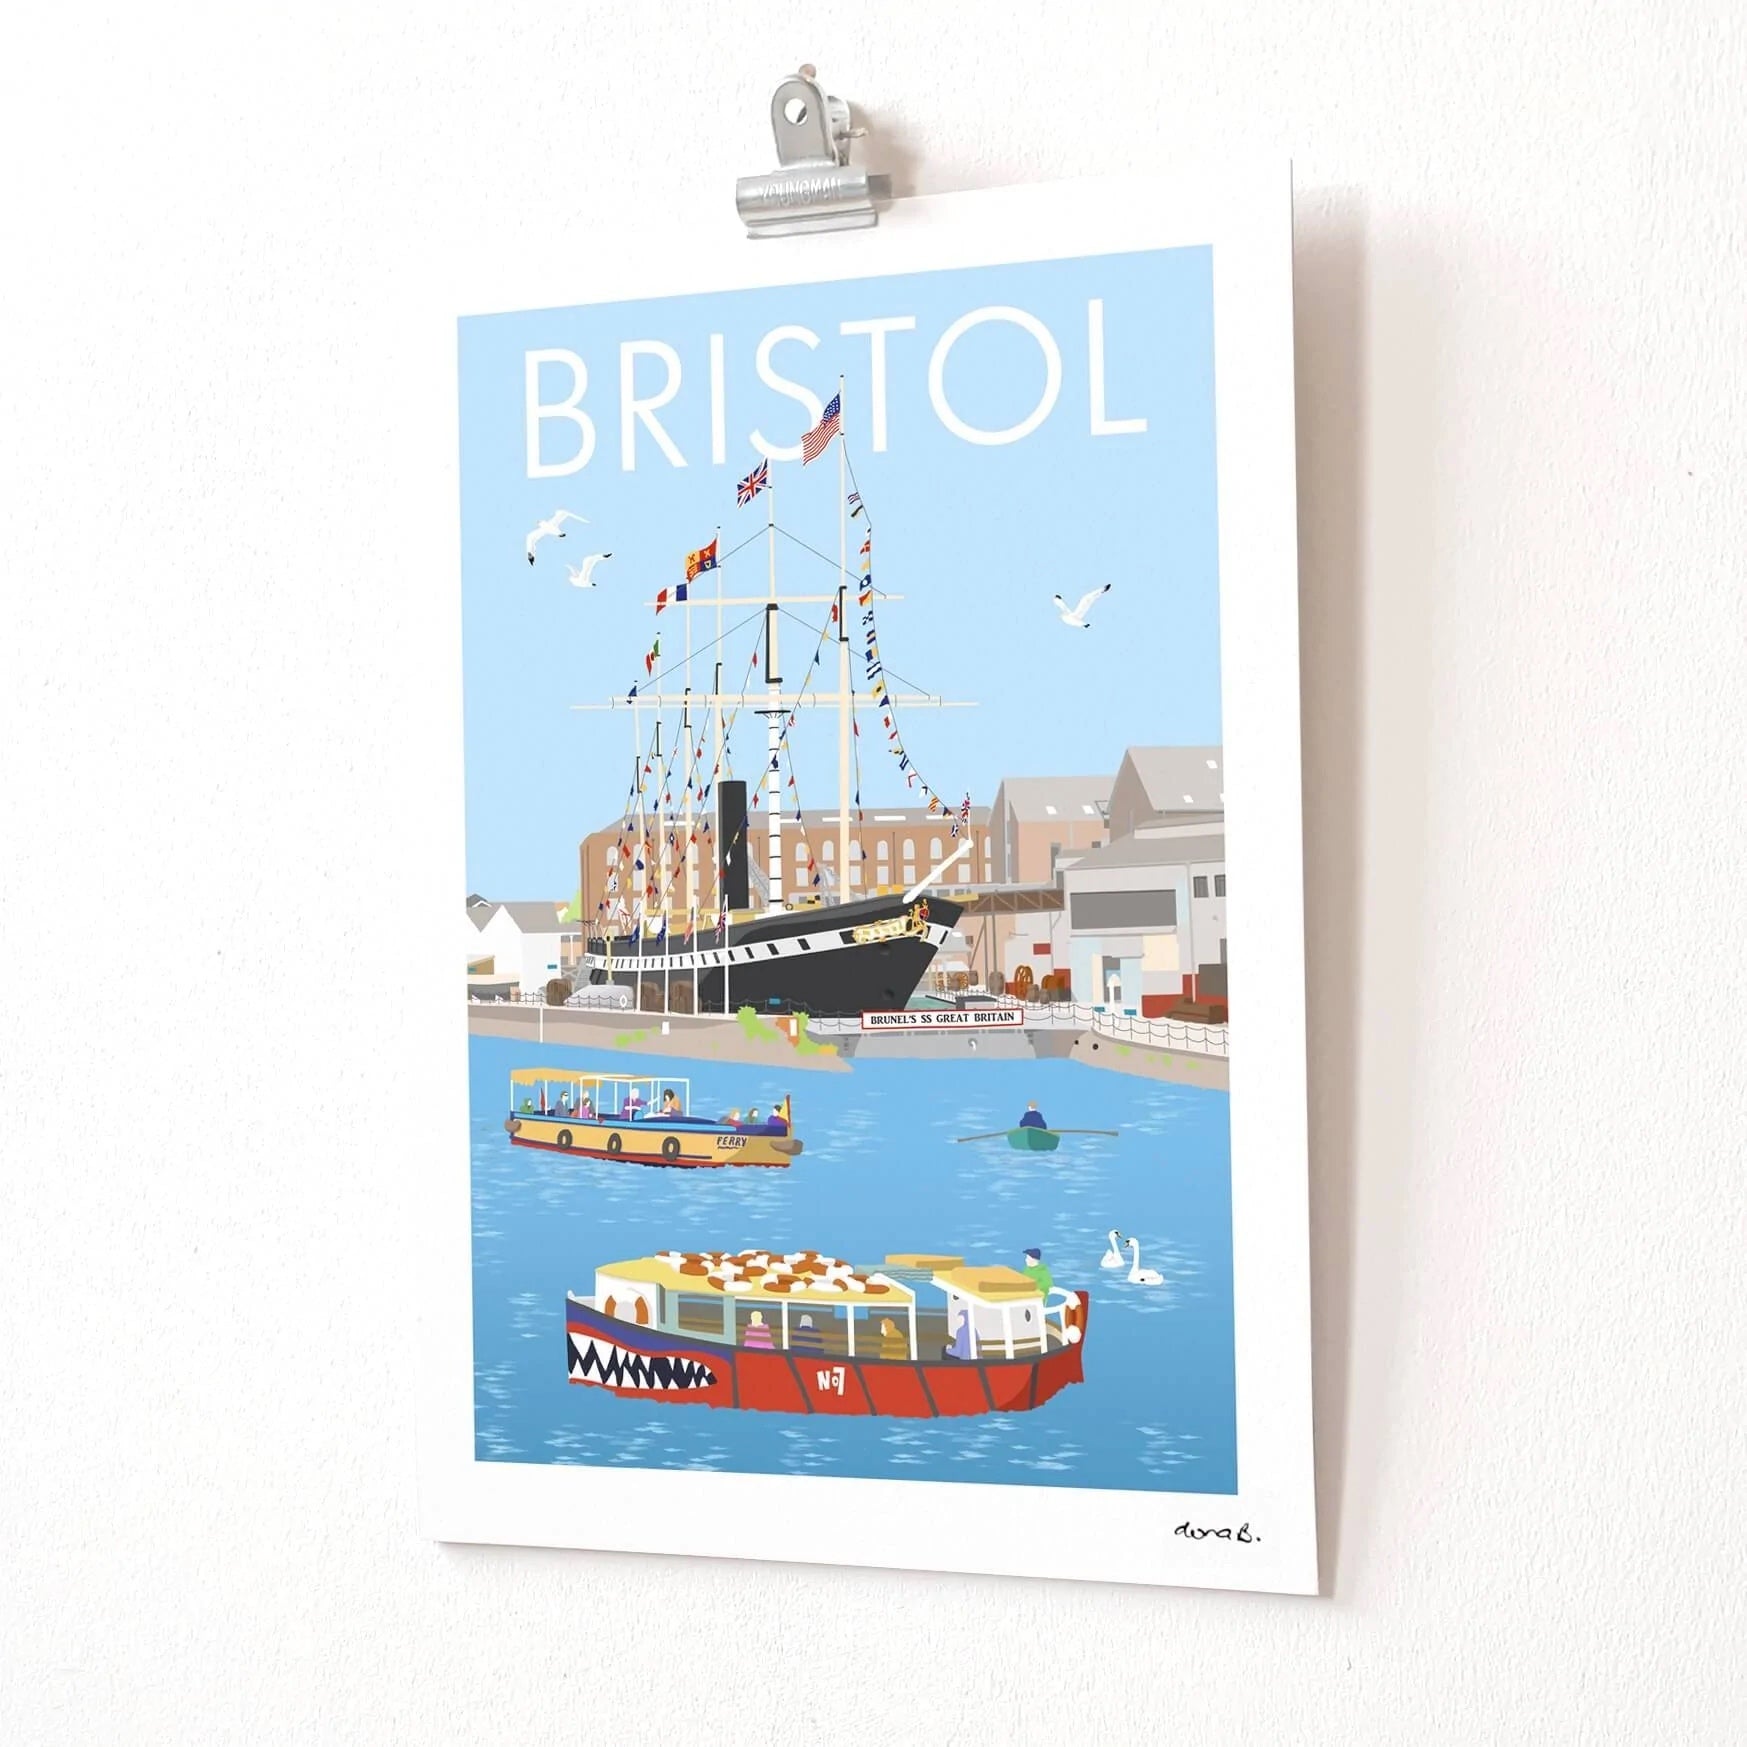 Giclee printed hand-drawn and digitally coloured illustration of Bristol's Floating Harbour